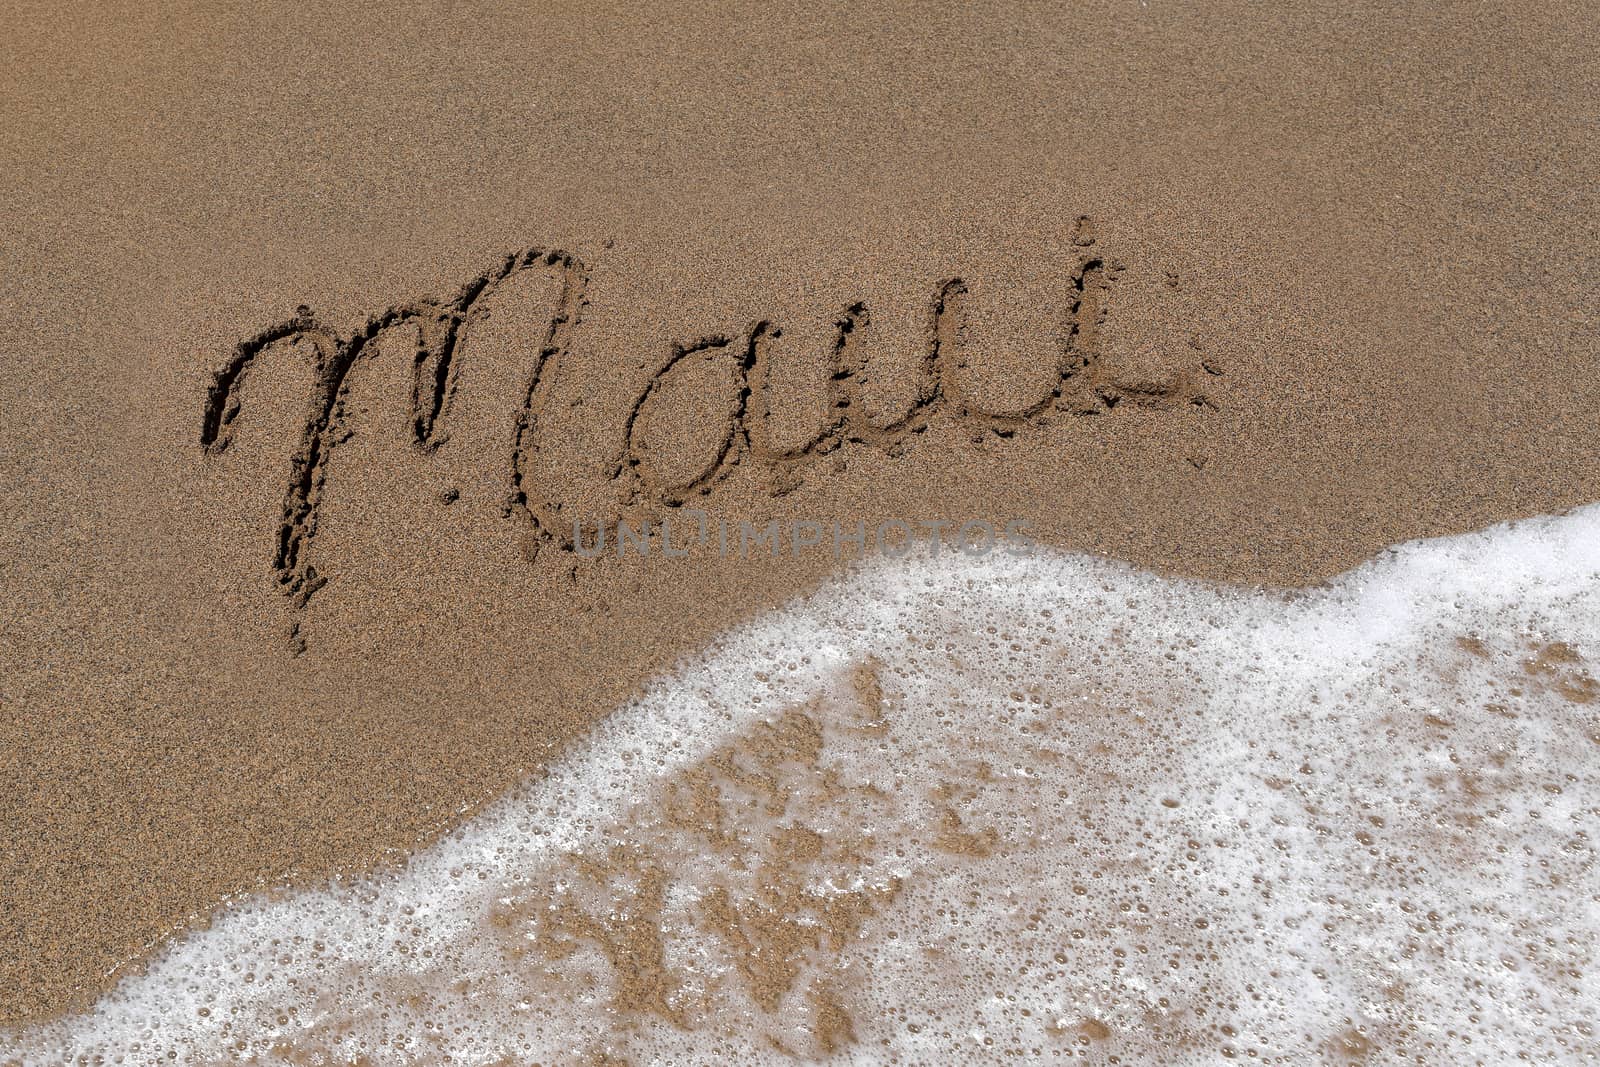 The Word Maui Written Into the Sand With Sea Foam